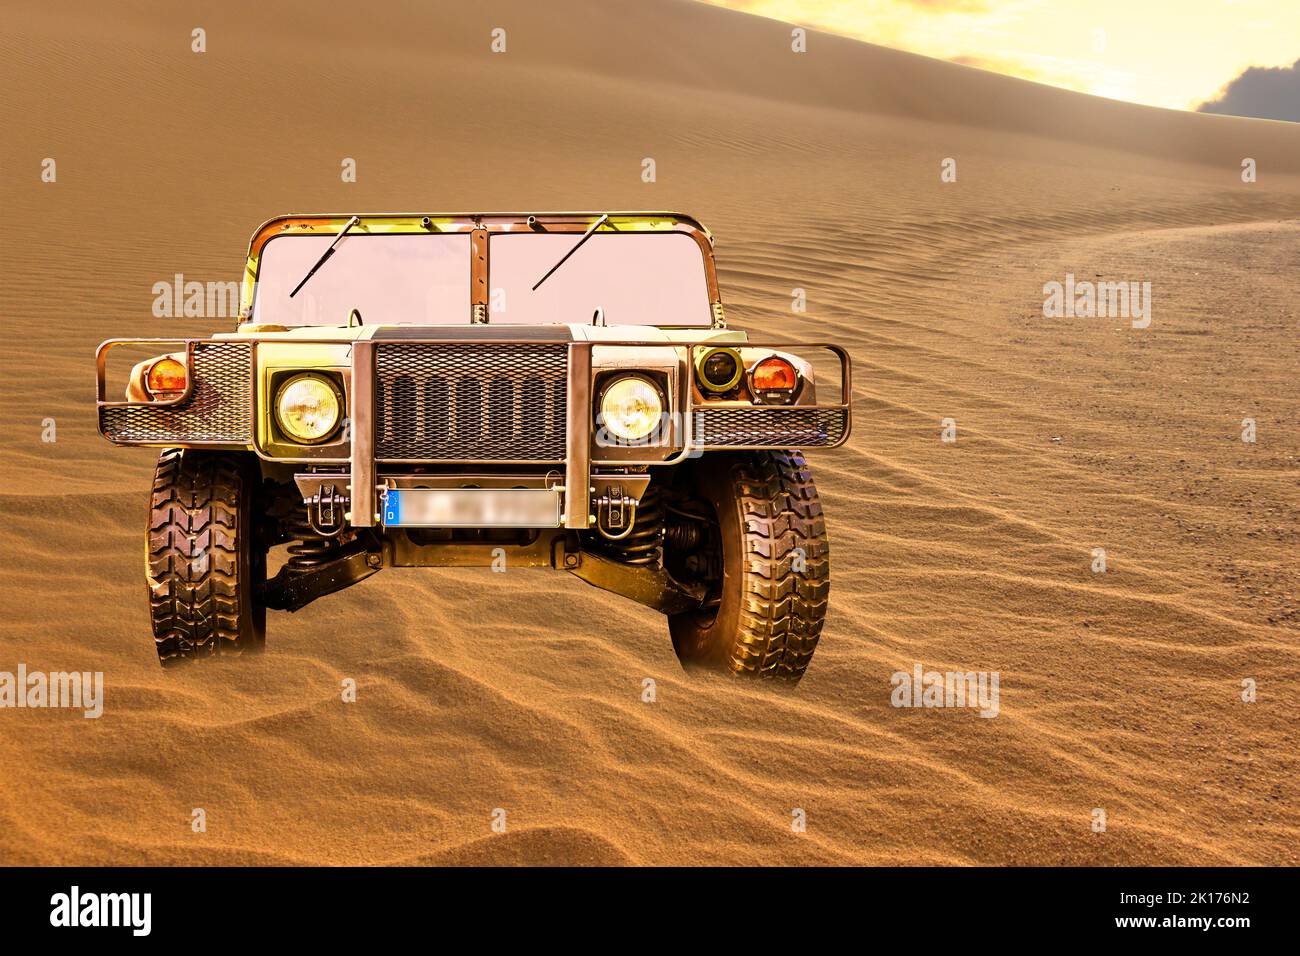 Humvee H1 military vehicle in camouflage on a dune in the sand of the desert, vehicle location Lehnin, Germany, September 11, 2022. Stock Photo